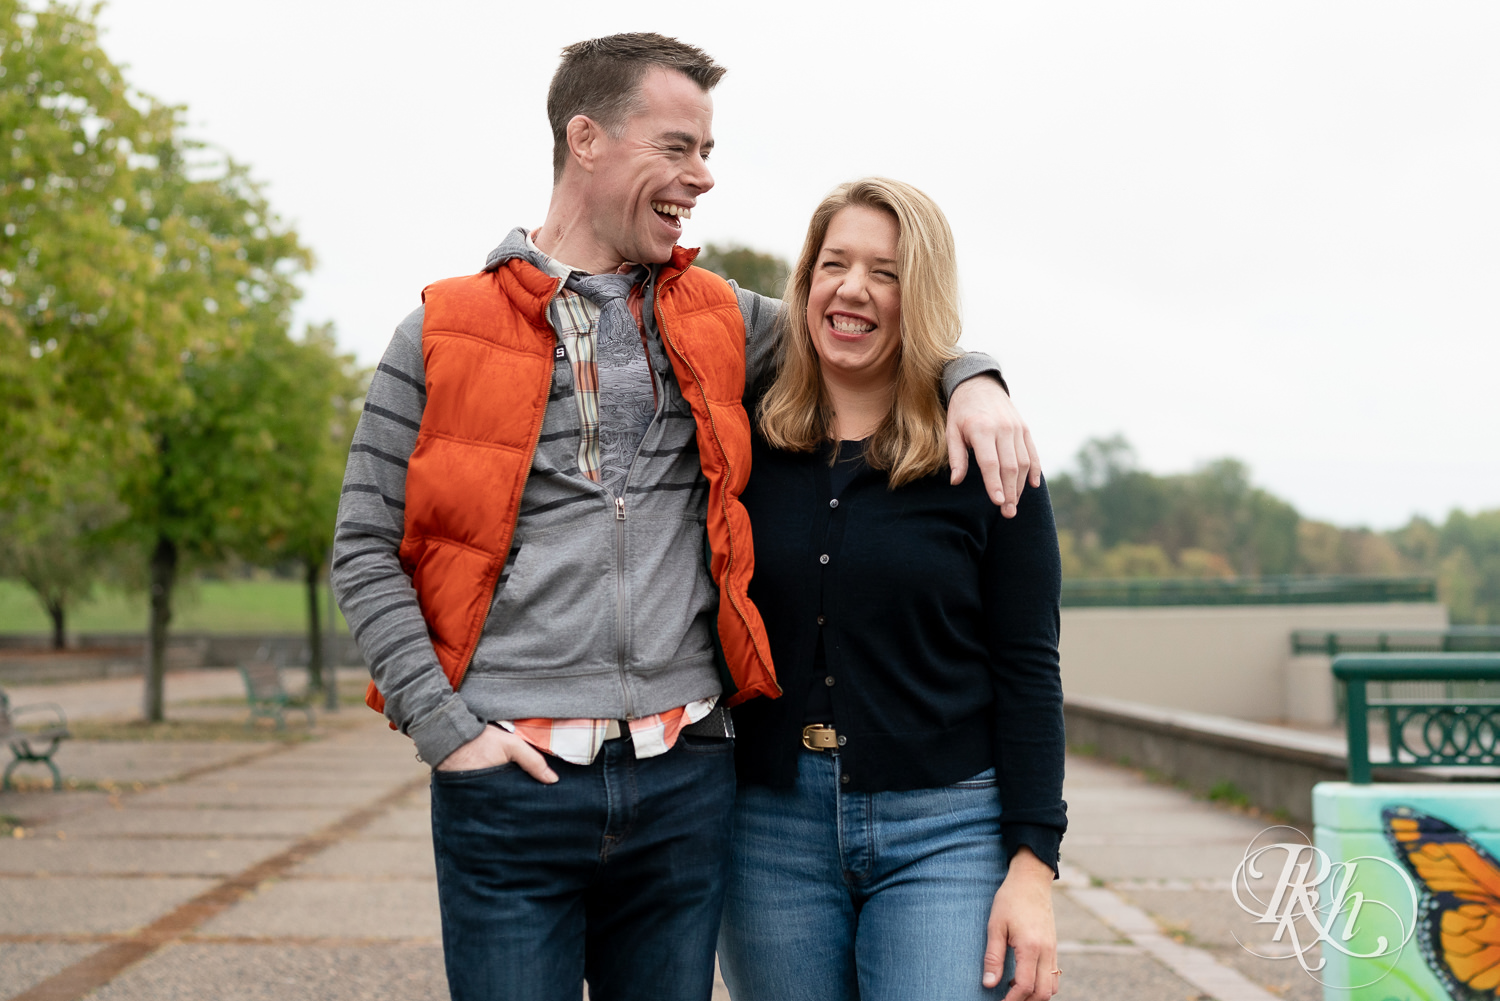 Man and woman in hoodies and jeans laugh during rainy engagement photos at Boom Island Park in Minneapolis, Minnesota.